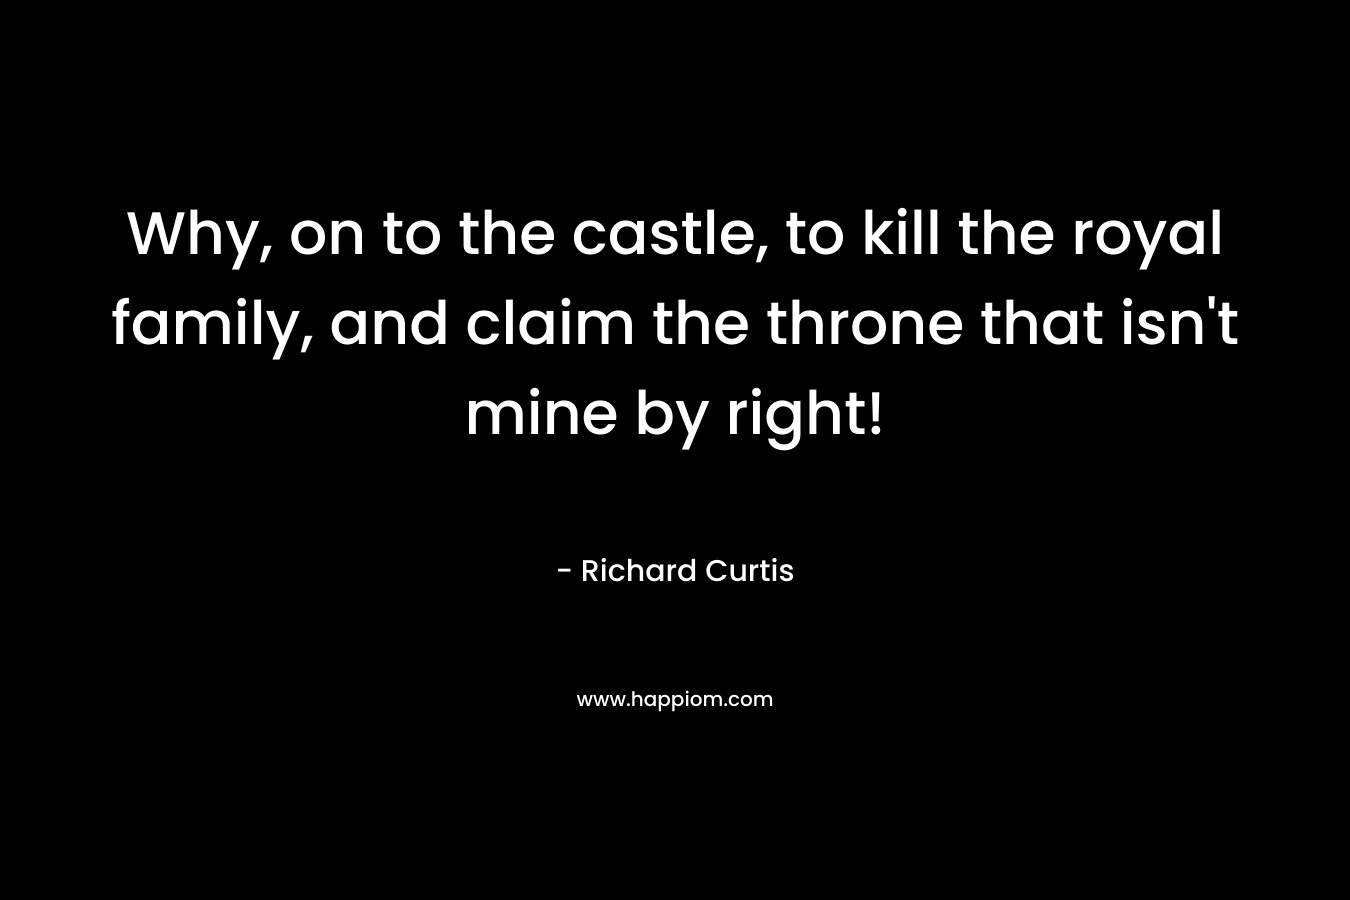 Why, on to the castle, to kill the royal family, and claim the throne that isn't mine by right!